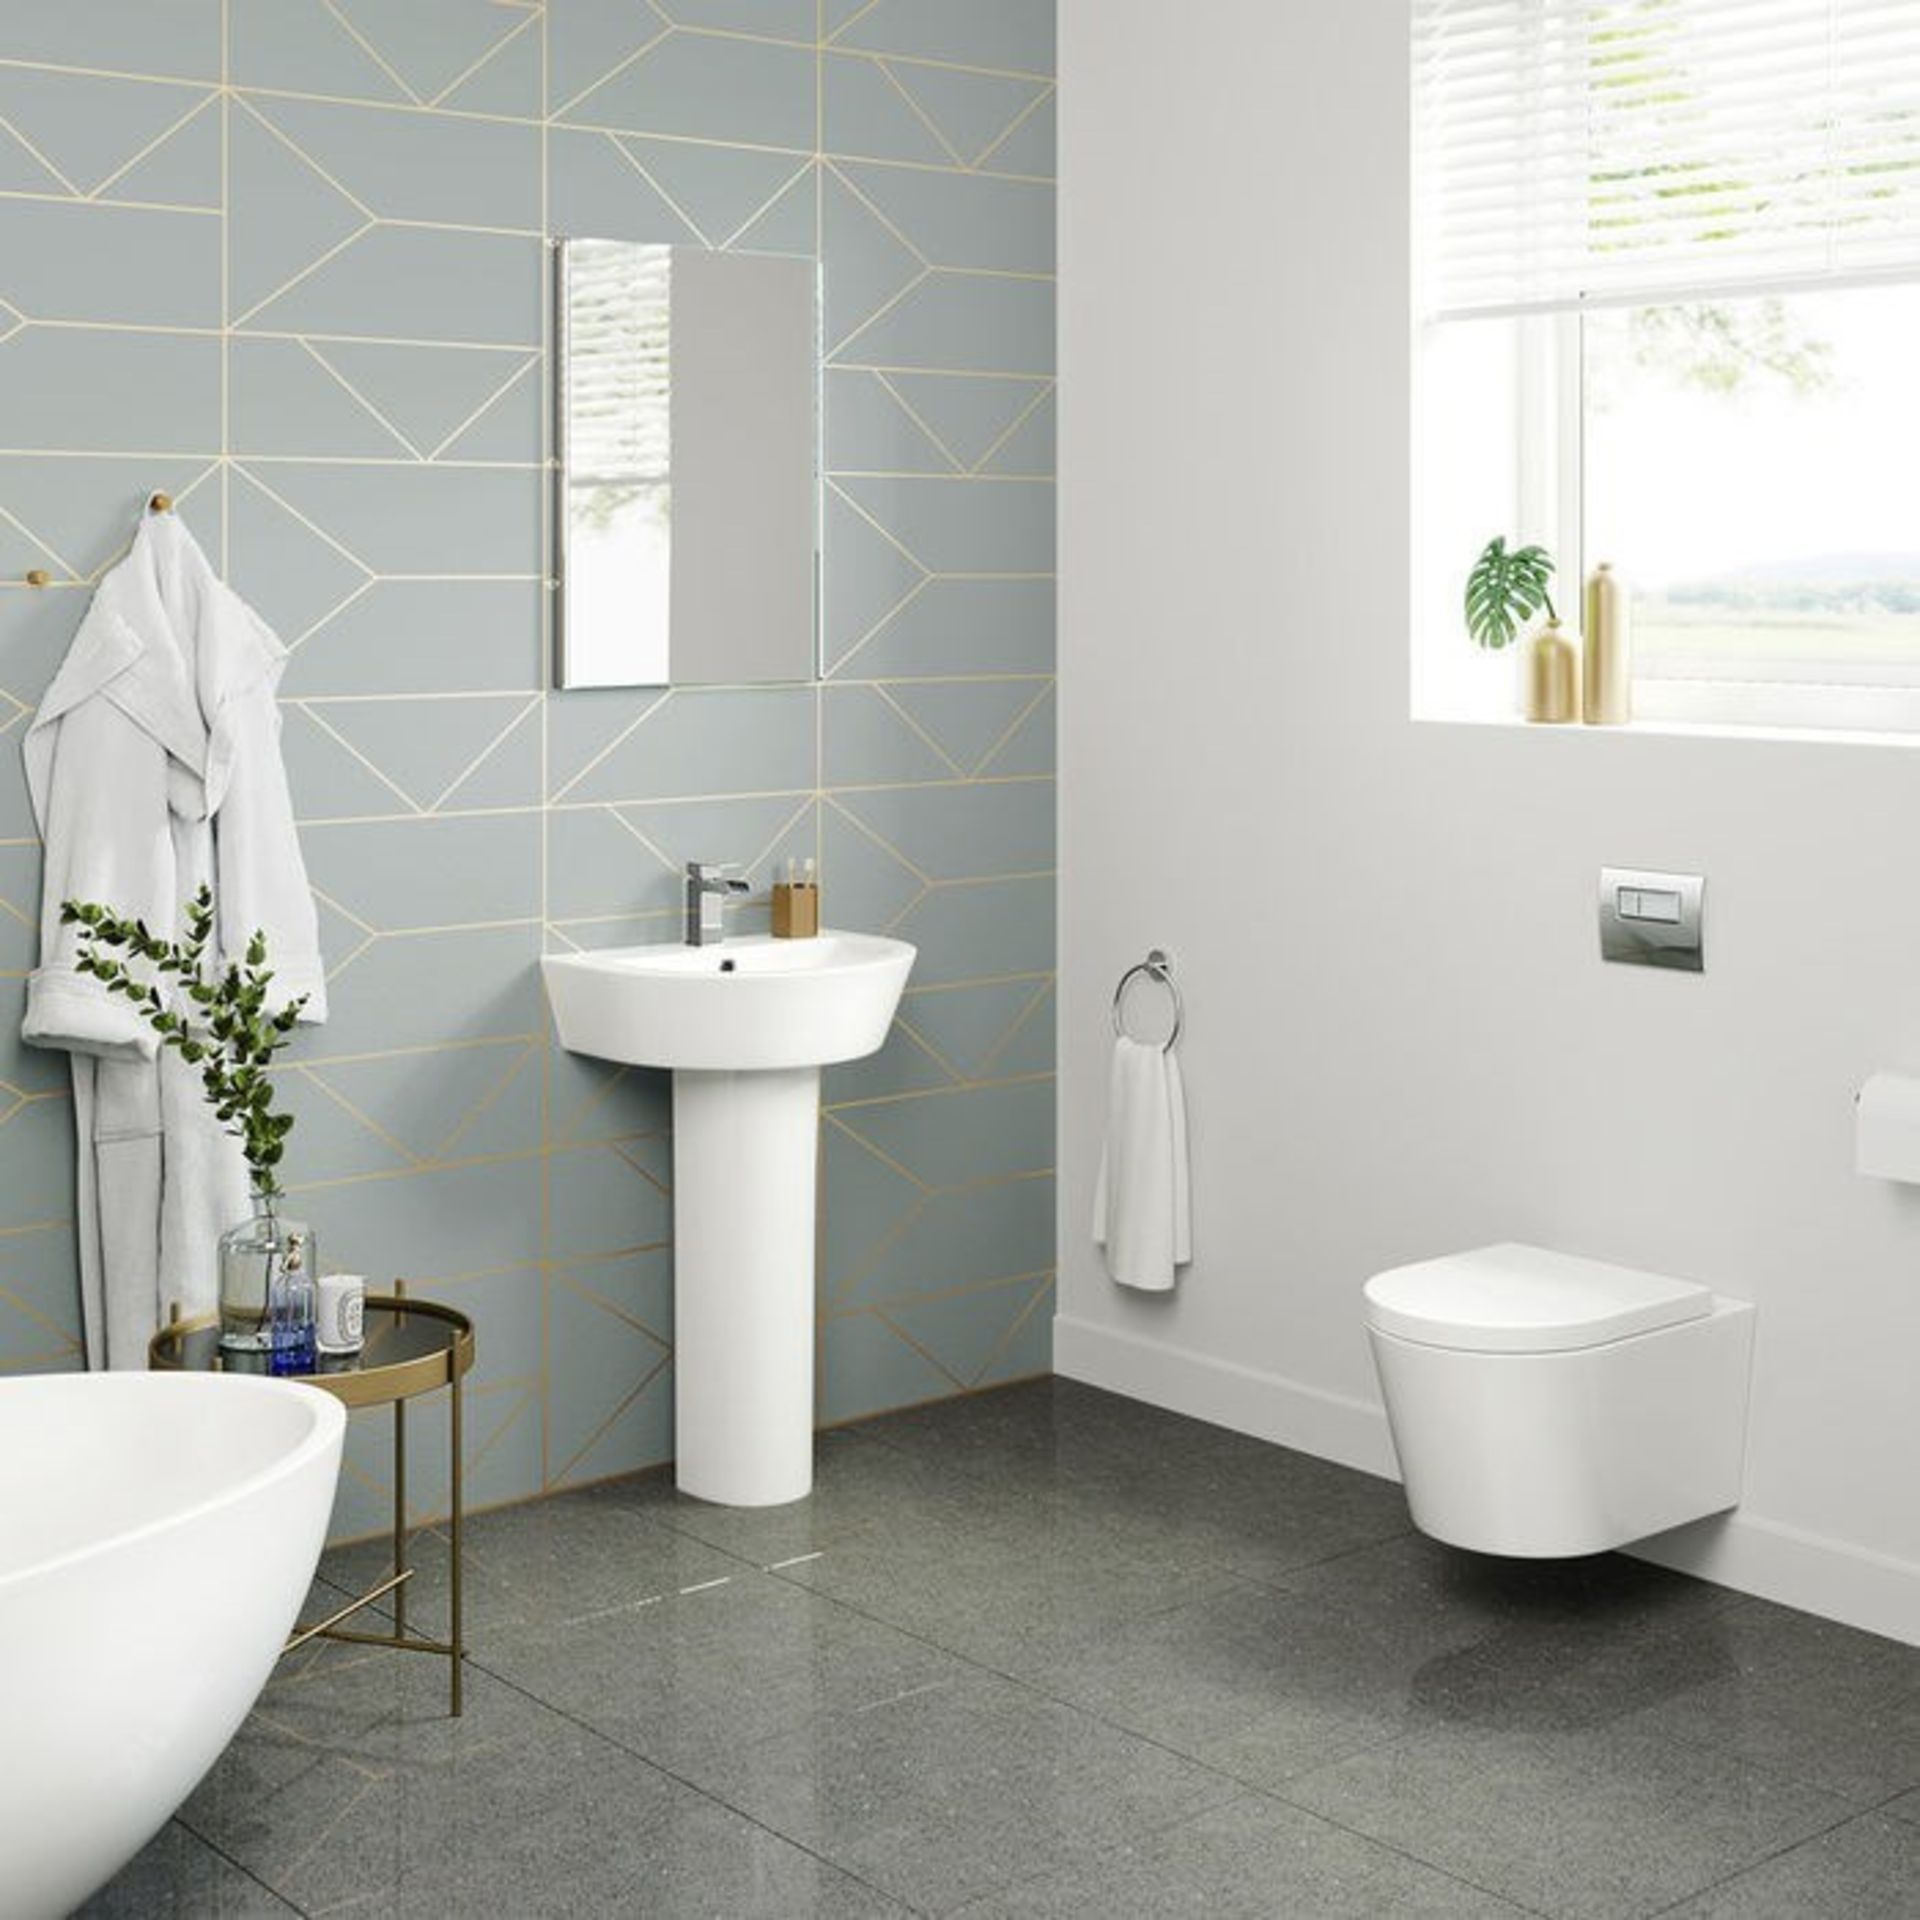 NEW & BOXED Lyon II Wall Hung Toilet inc Luxury Soft Close Seat. RRP £349.99 each.We love th... - Image 2 of 2